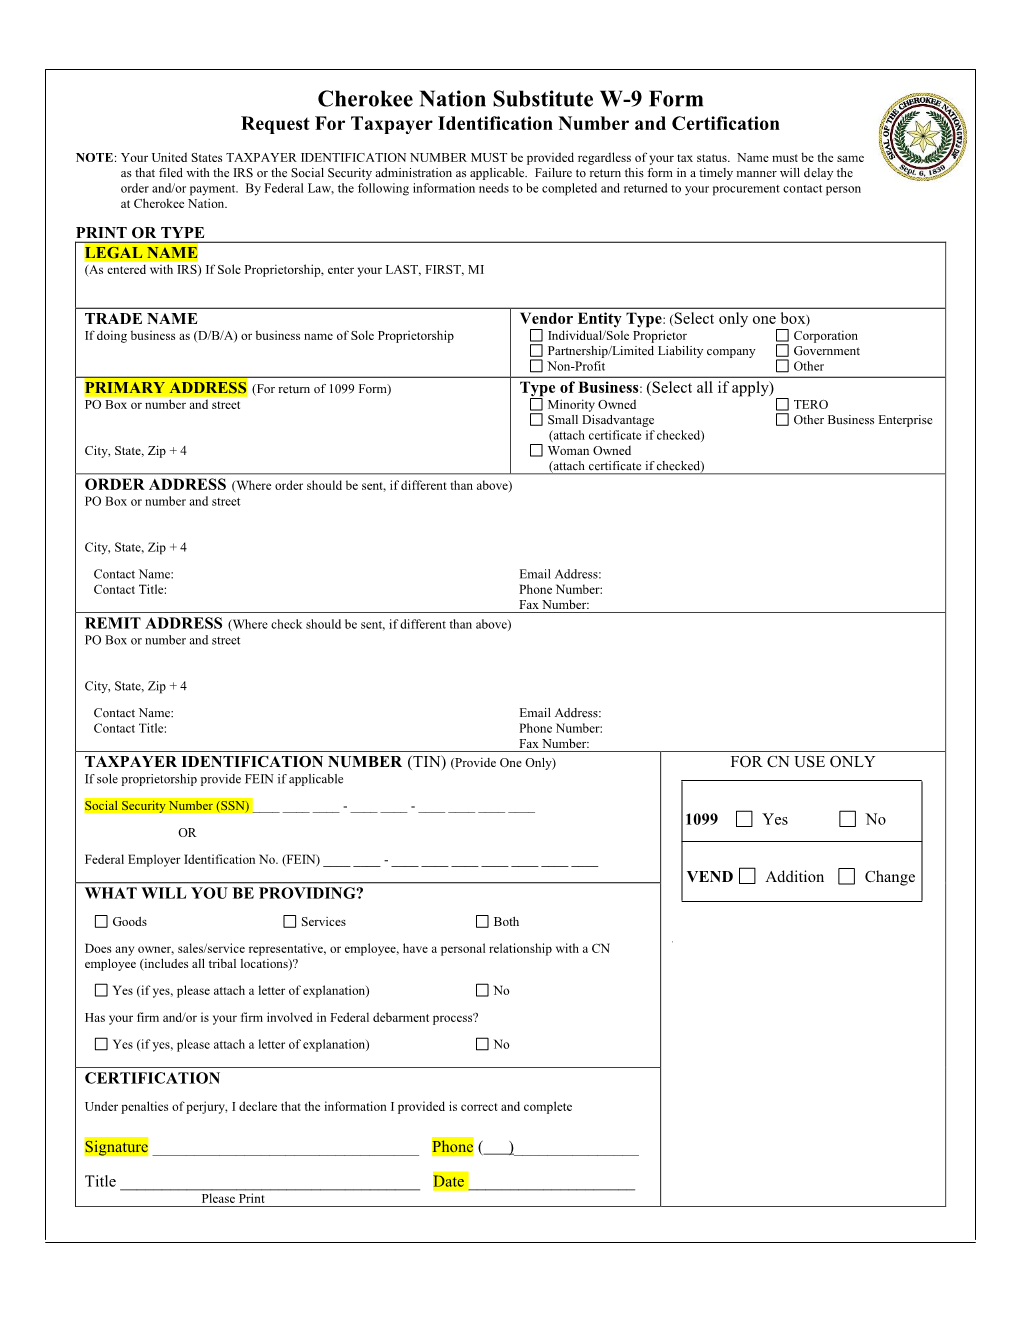 Cherokee Nation Substitute W-9 Form Request for Taxpayer Identification Number and Certification